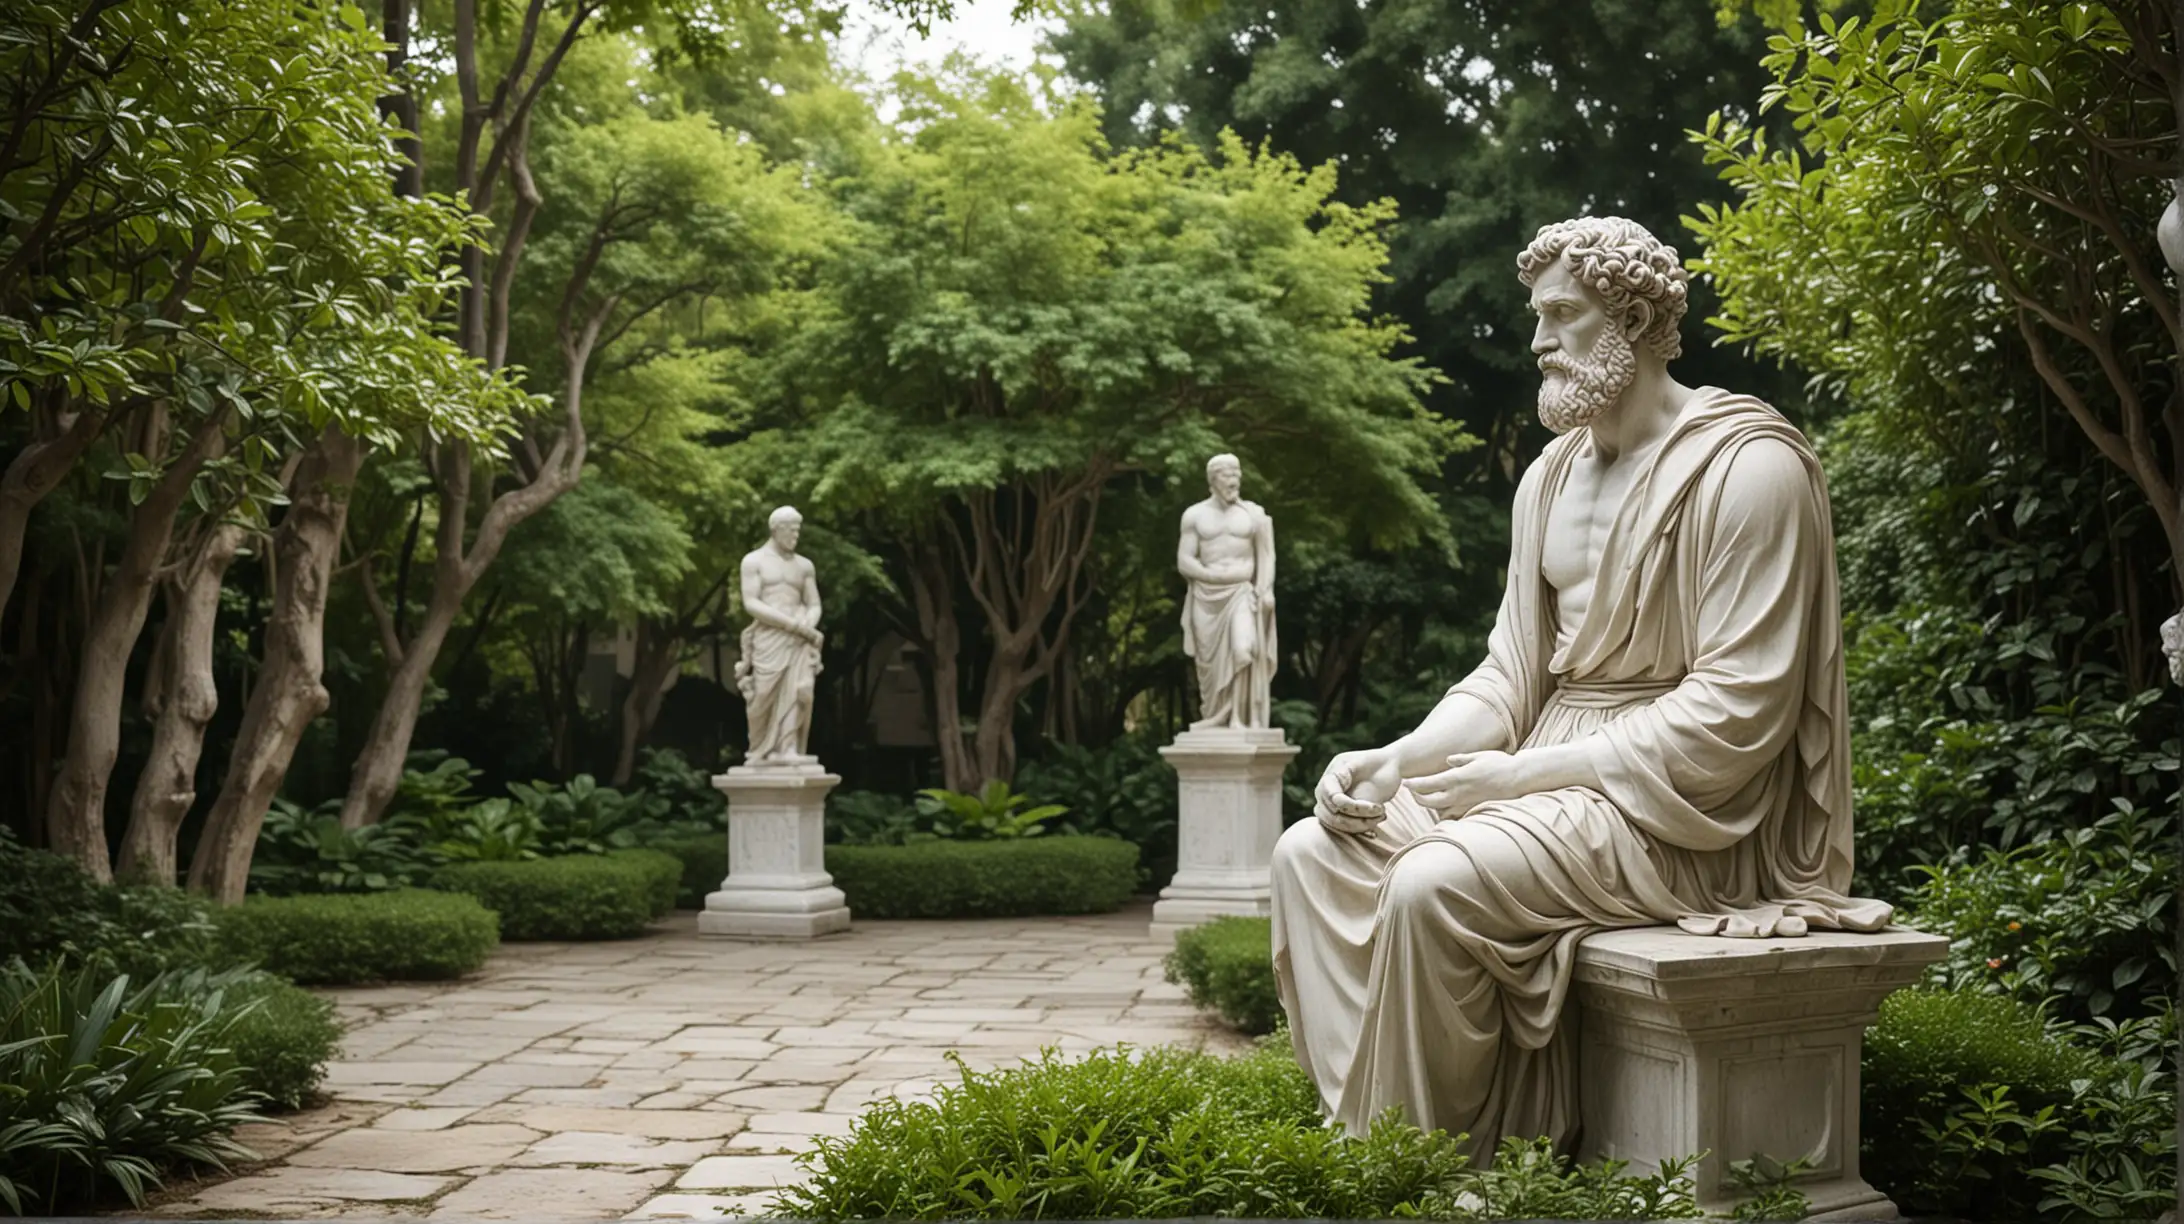 Visualize a Stoic Philosopher in Contemplation: Illustrate a stoic philosopher sitting in a serene garden, surrounded by marble statues and lush greenery. The philosopher has a lean and muscular build, with a focused expression as they contemplate the principles of stoic ethics. generate two distinct images